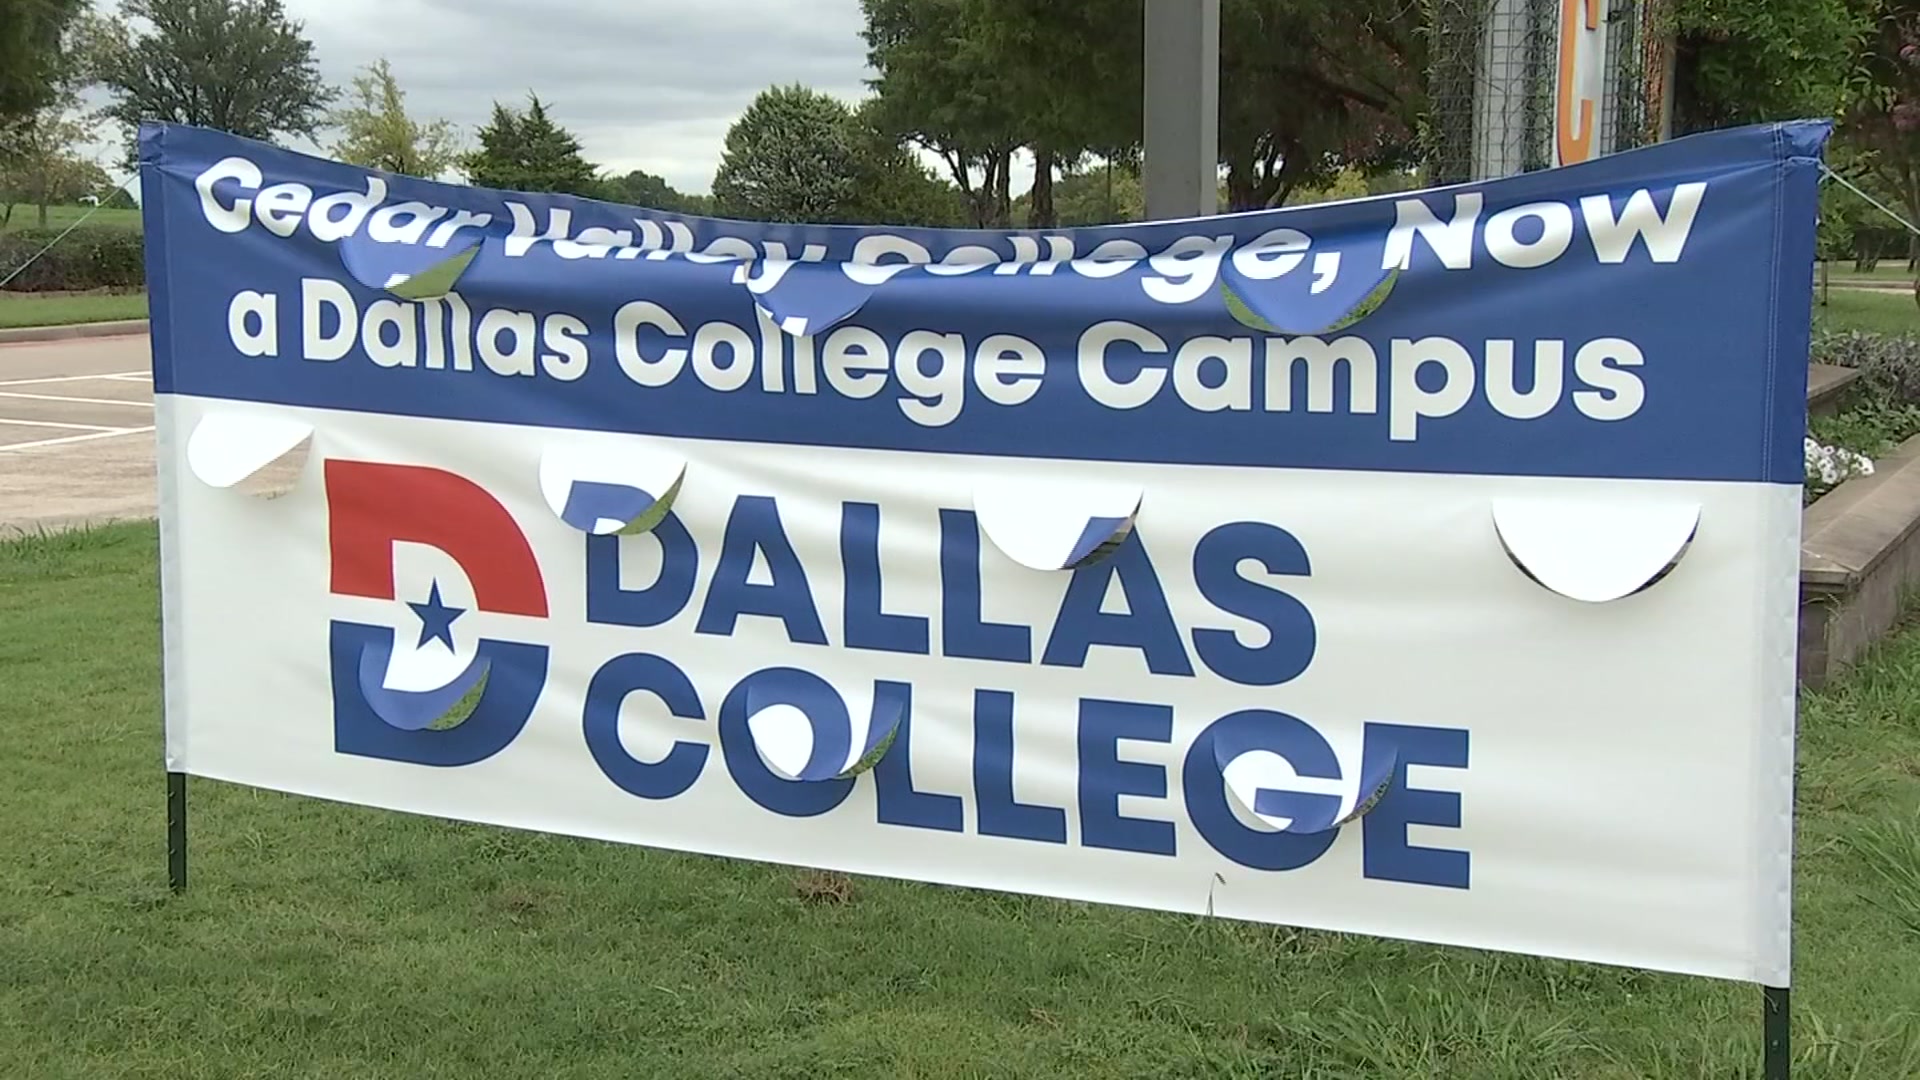 Dallas College' approved as new name for community college district